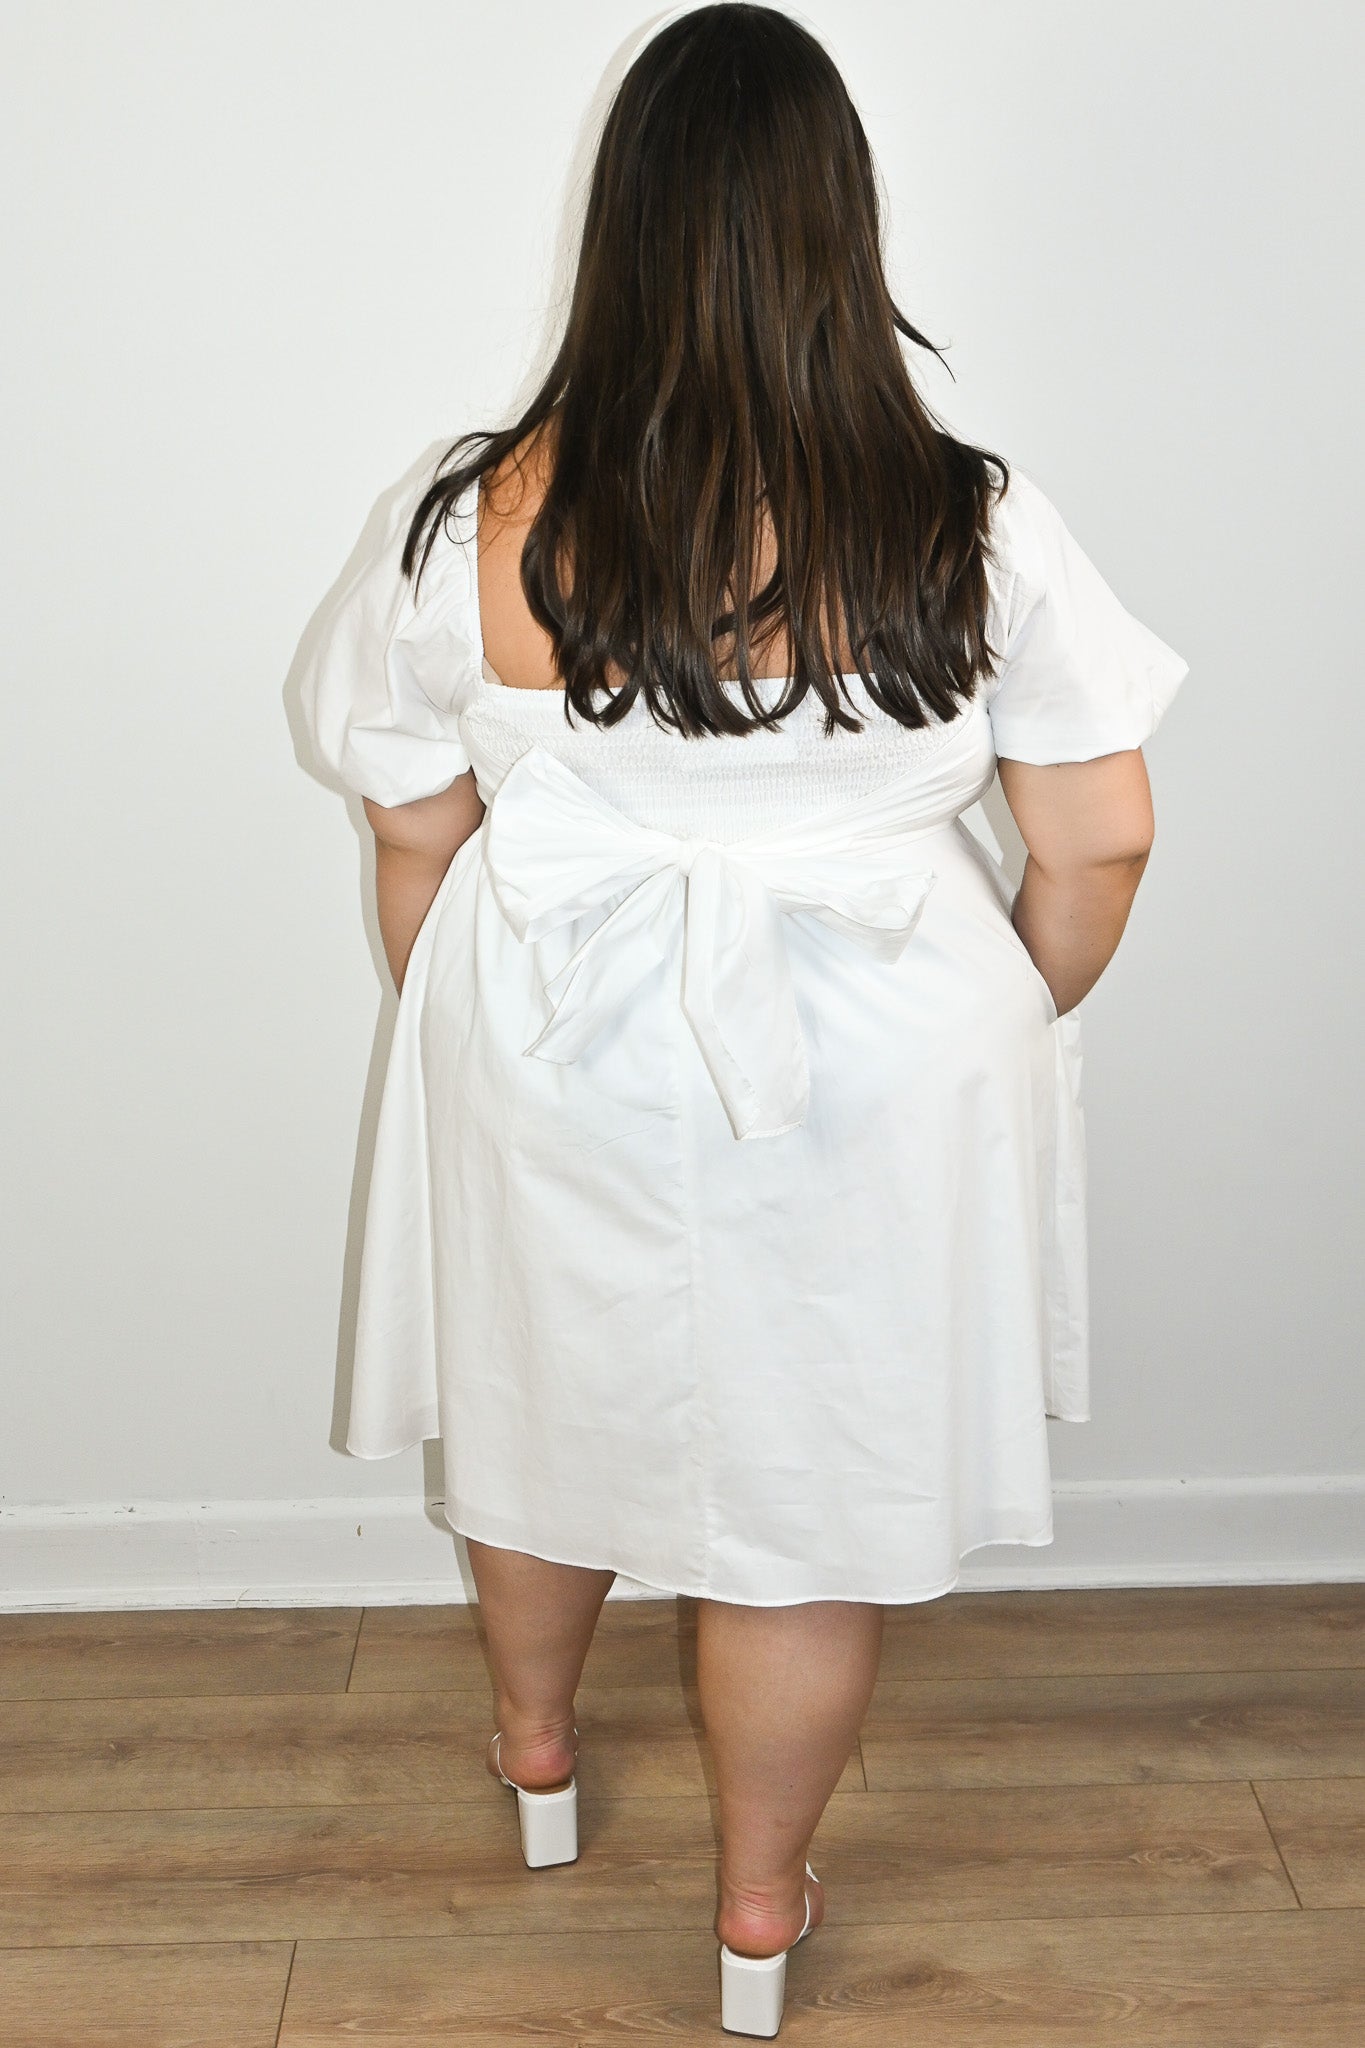 PLus size White dress for bachelorette party, bridal shower or engagemenet party